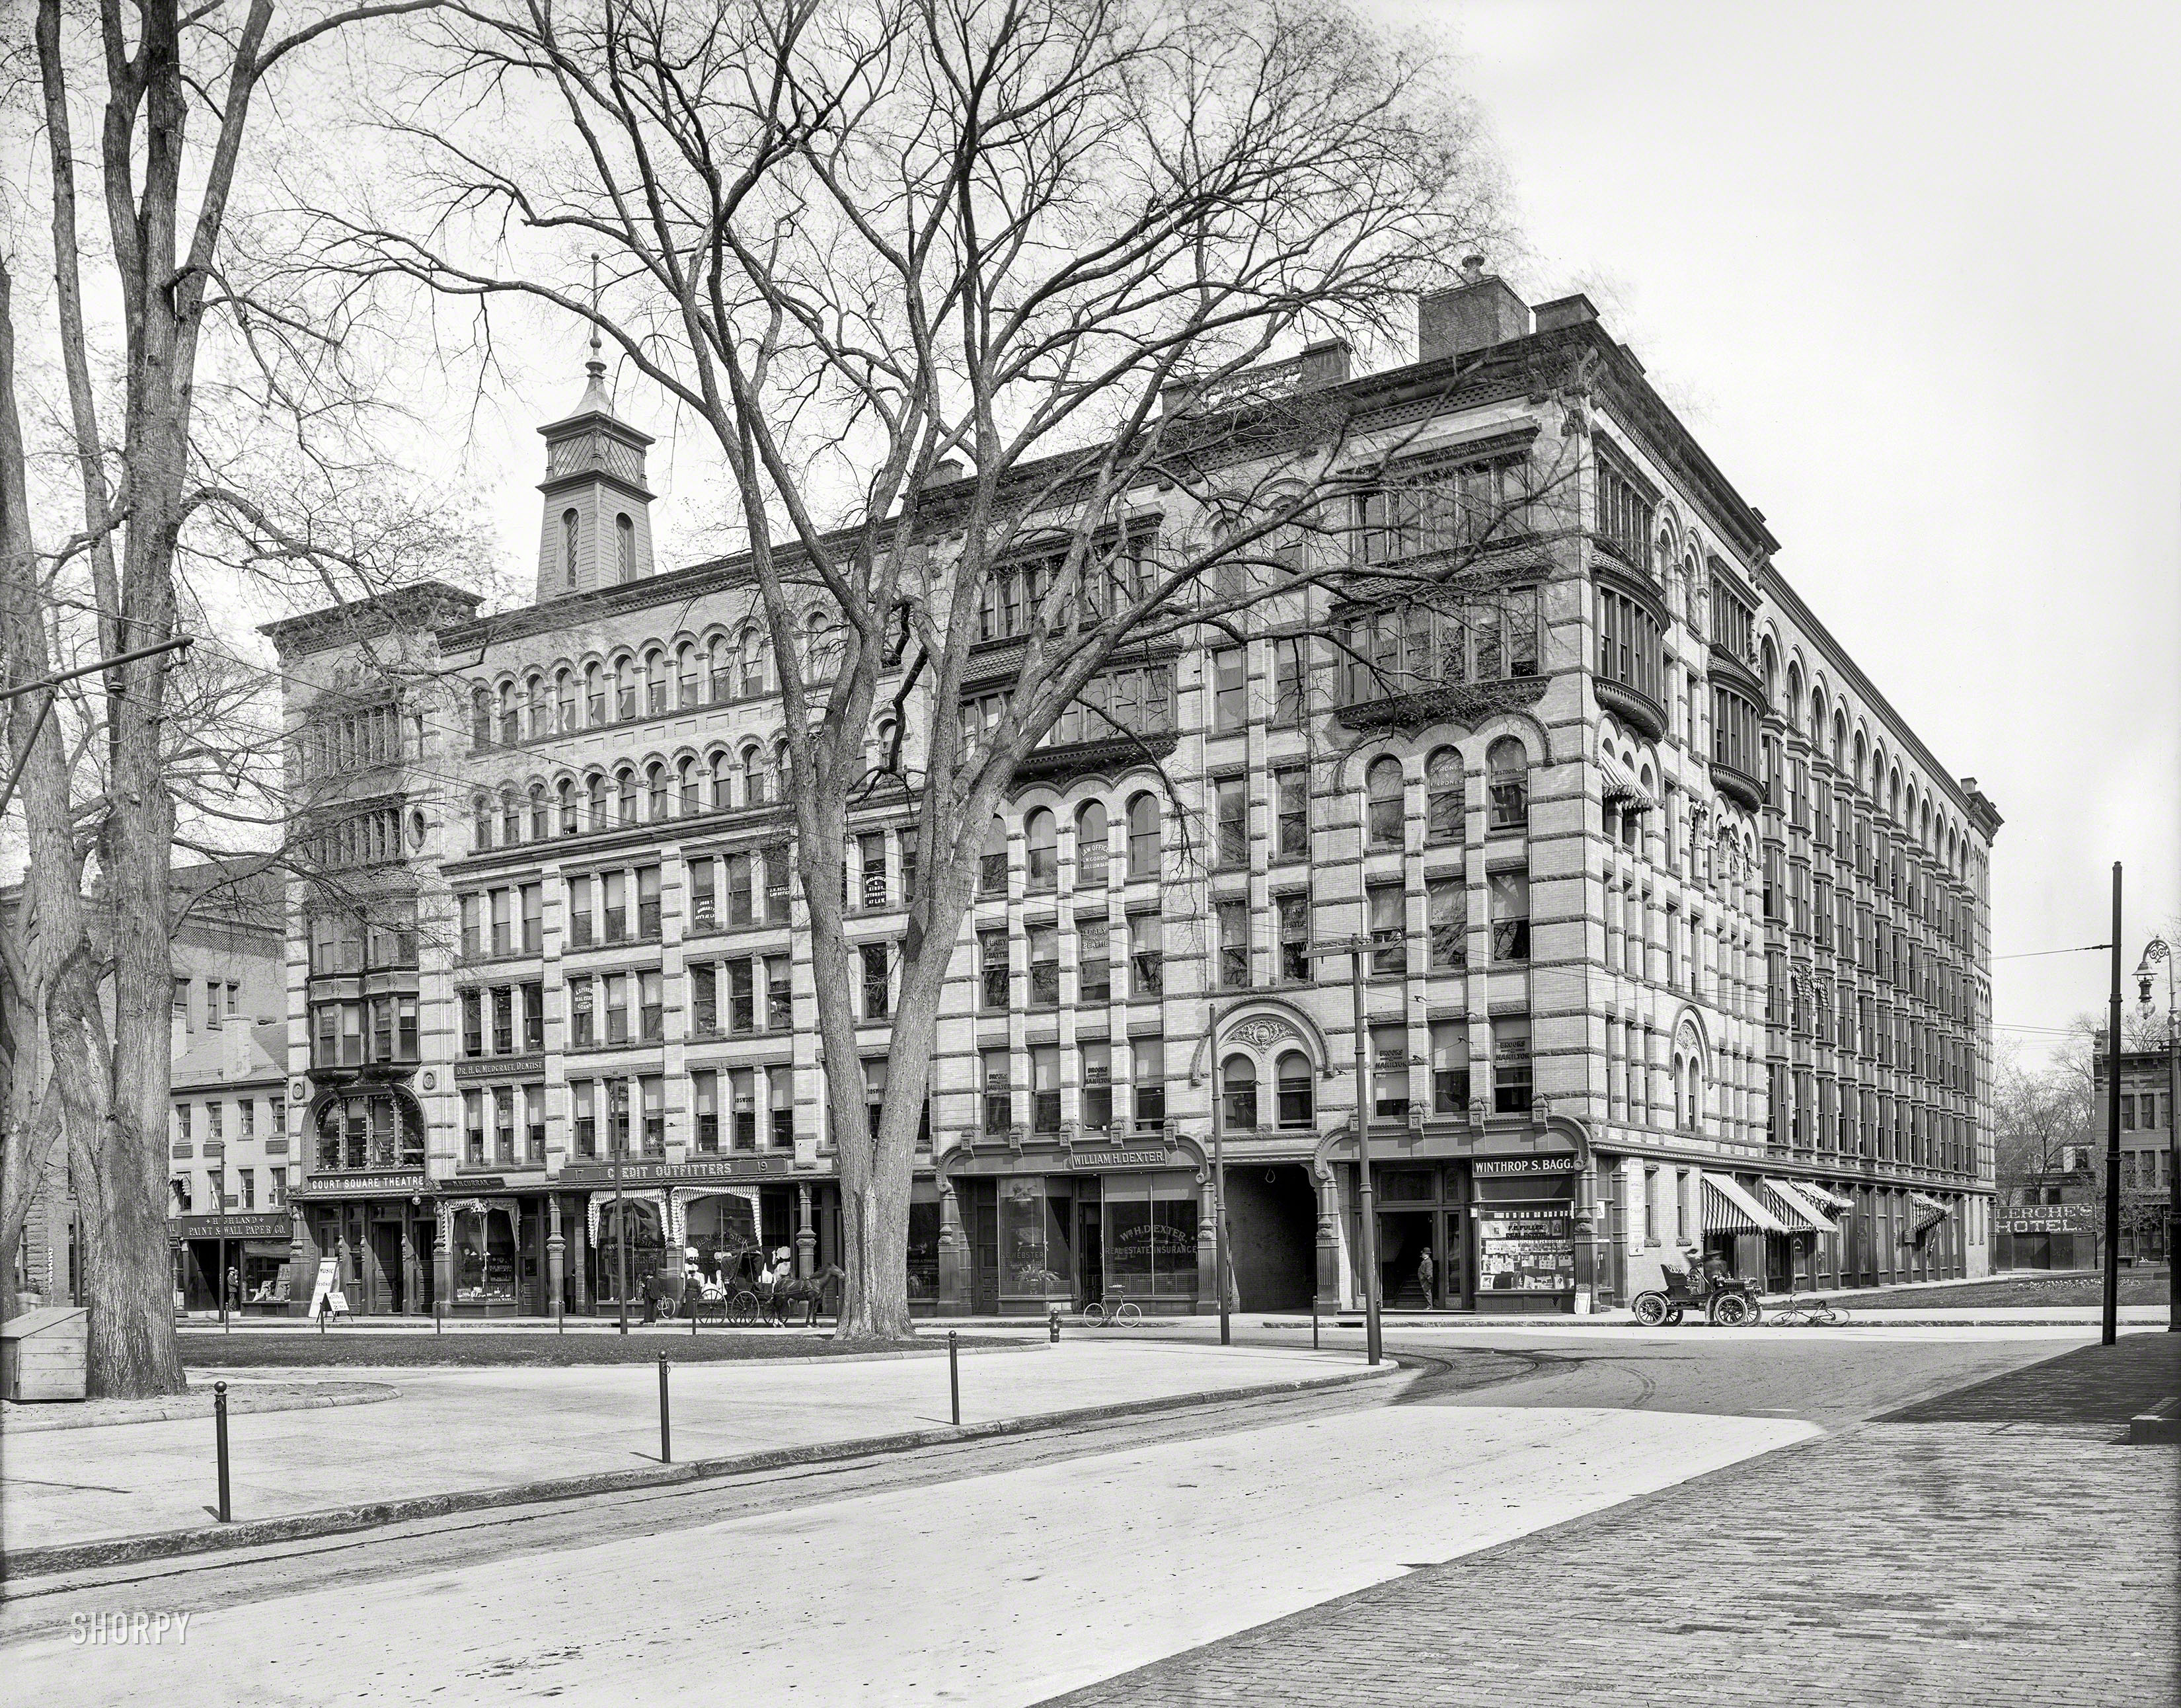 Springfield, Mass., circa 1908. "Court House Place -- Court Square Theatre Building and Court Square Hotel." 8x10 inch glass negative. View full size.